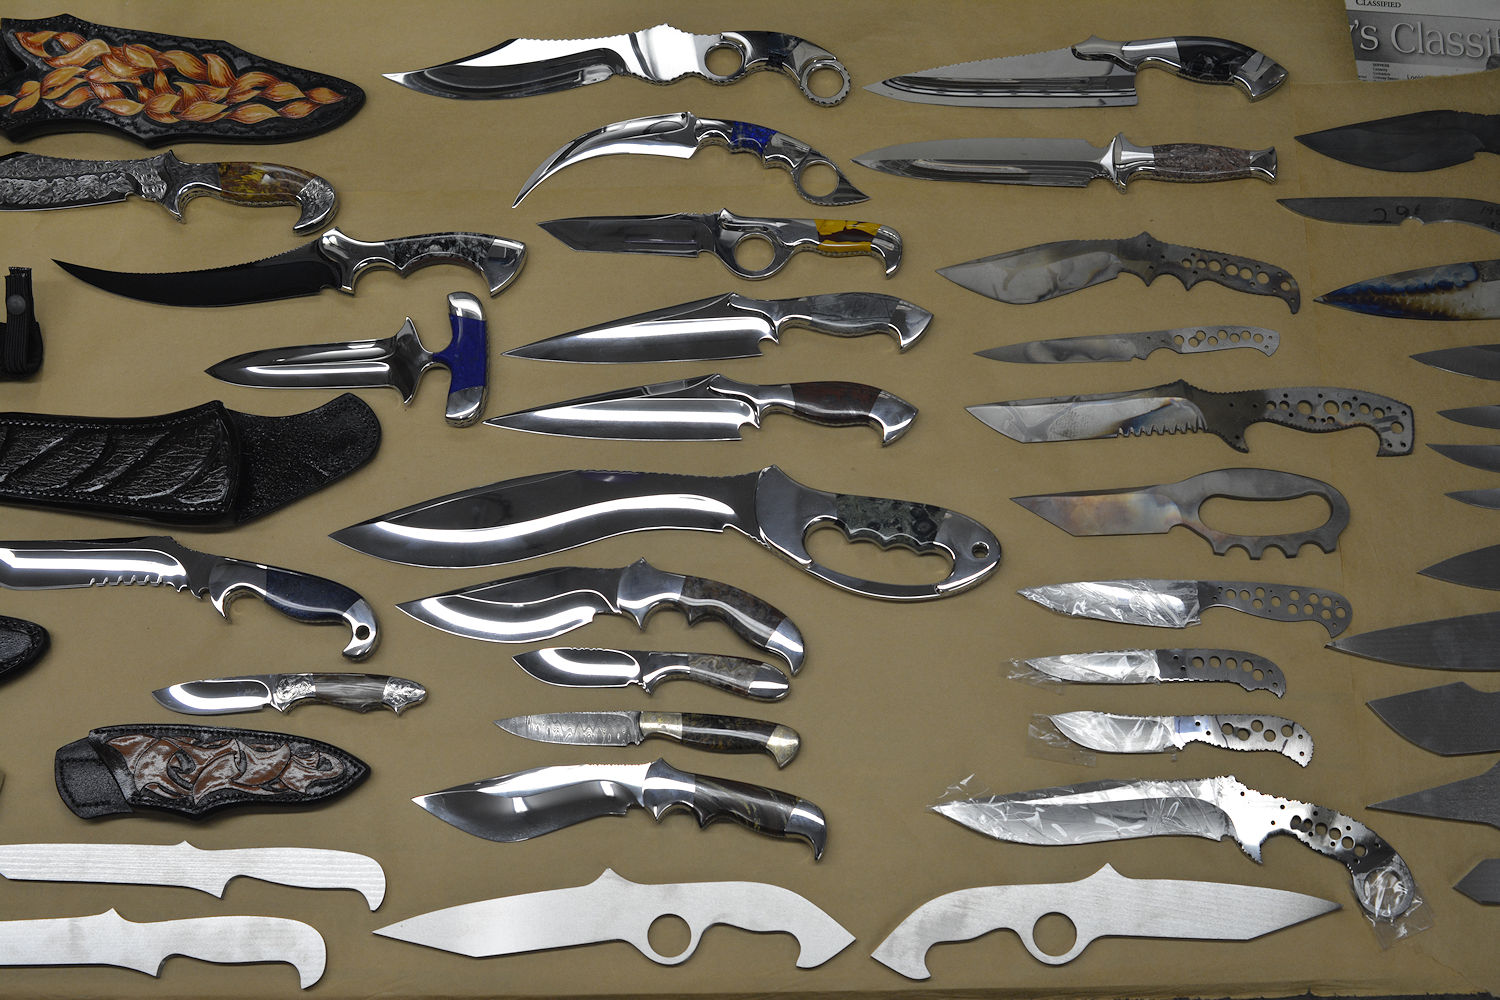 Works in progress. Jay Fisher's knives in various states of construction